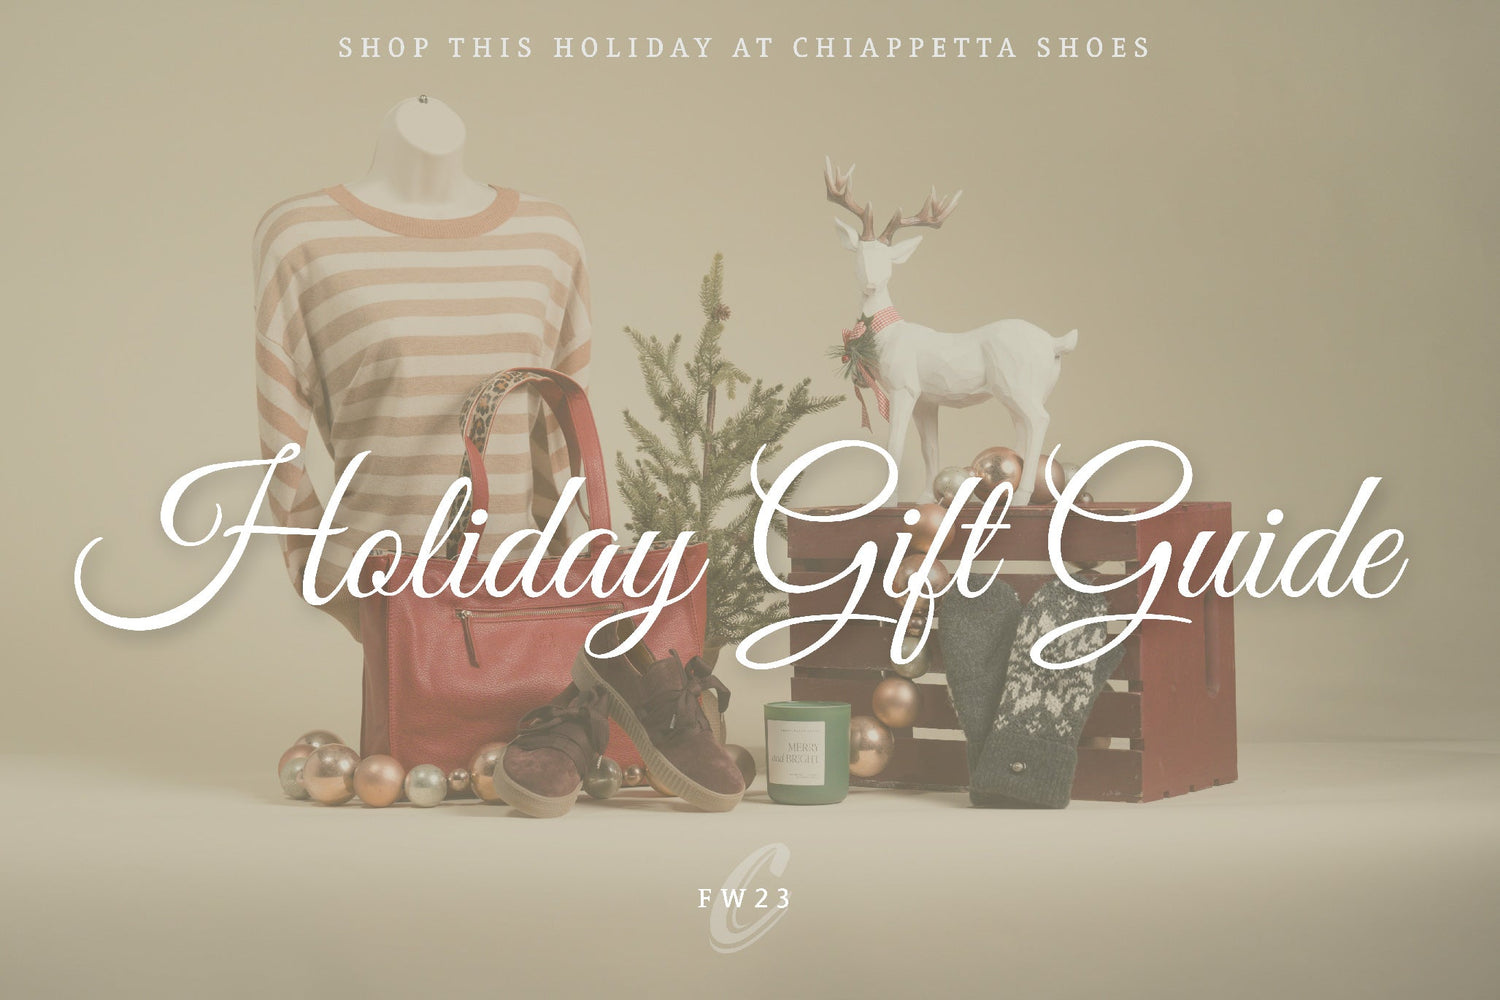 FW23 Holiday Gift Guide at Chiappetta Shoes